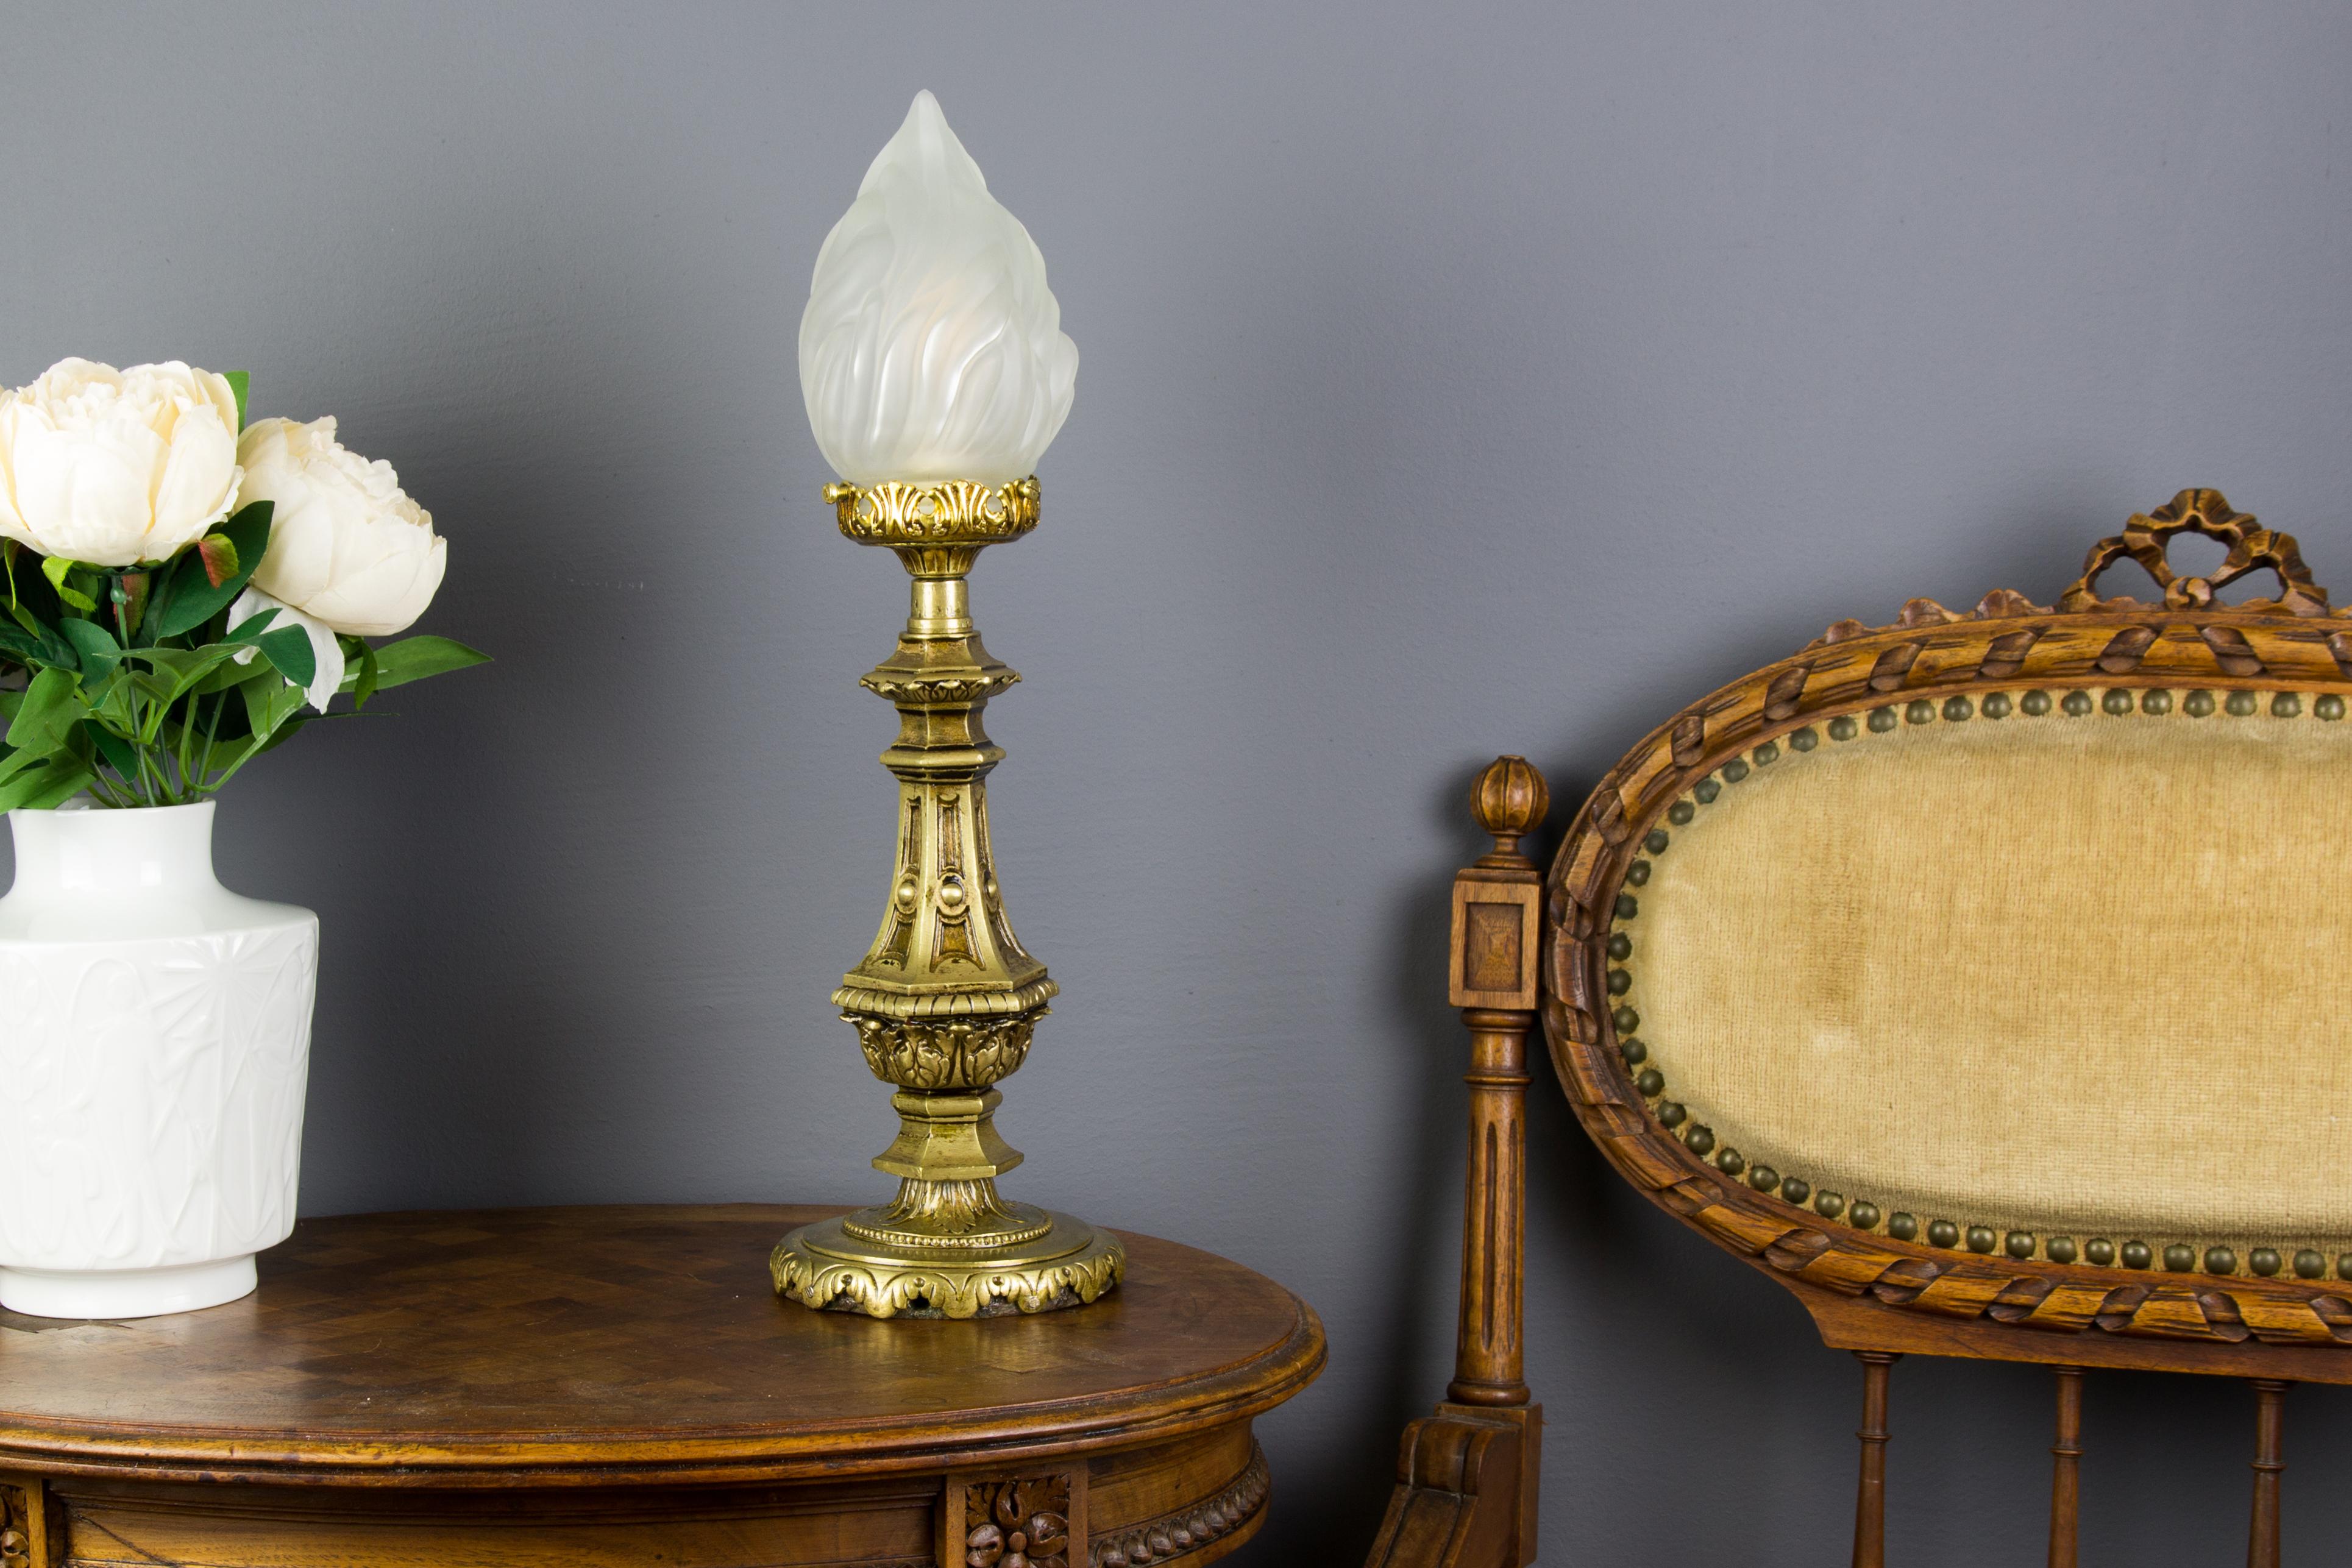 Louis XVI style bronze table lamp with frosted glass flame shade. One socket for a B22 size light bulb.
Dimensions: Height 38 cm / 14.96 in, diameter 12 cm / 4.72 in.